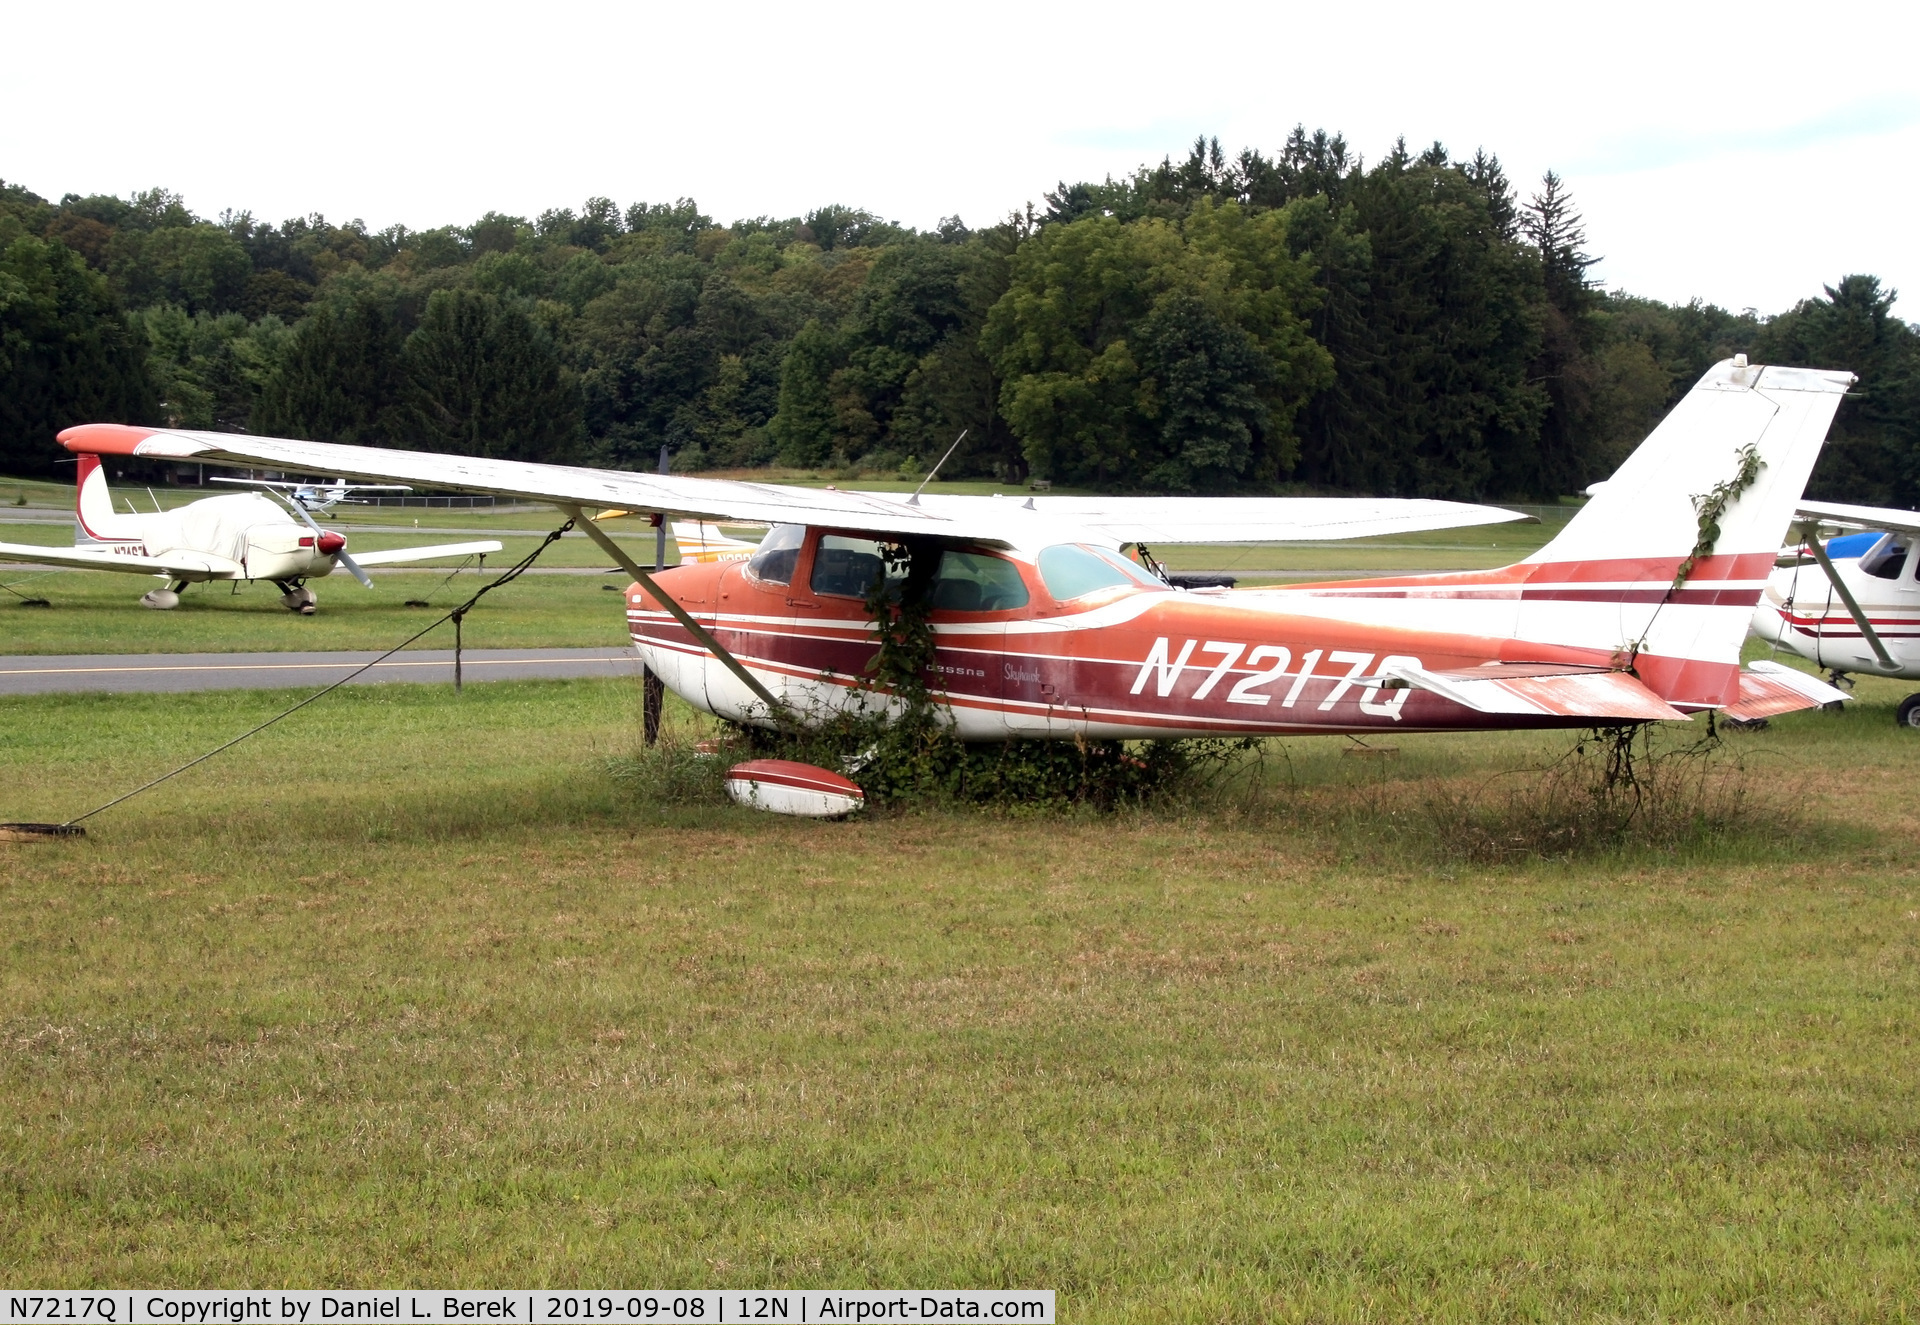 N7217Q, 1972 Cessna 172L C/N 17260517, Vegetation started growing around this old bird when I visited her, September 2019.